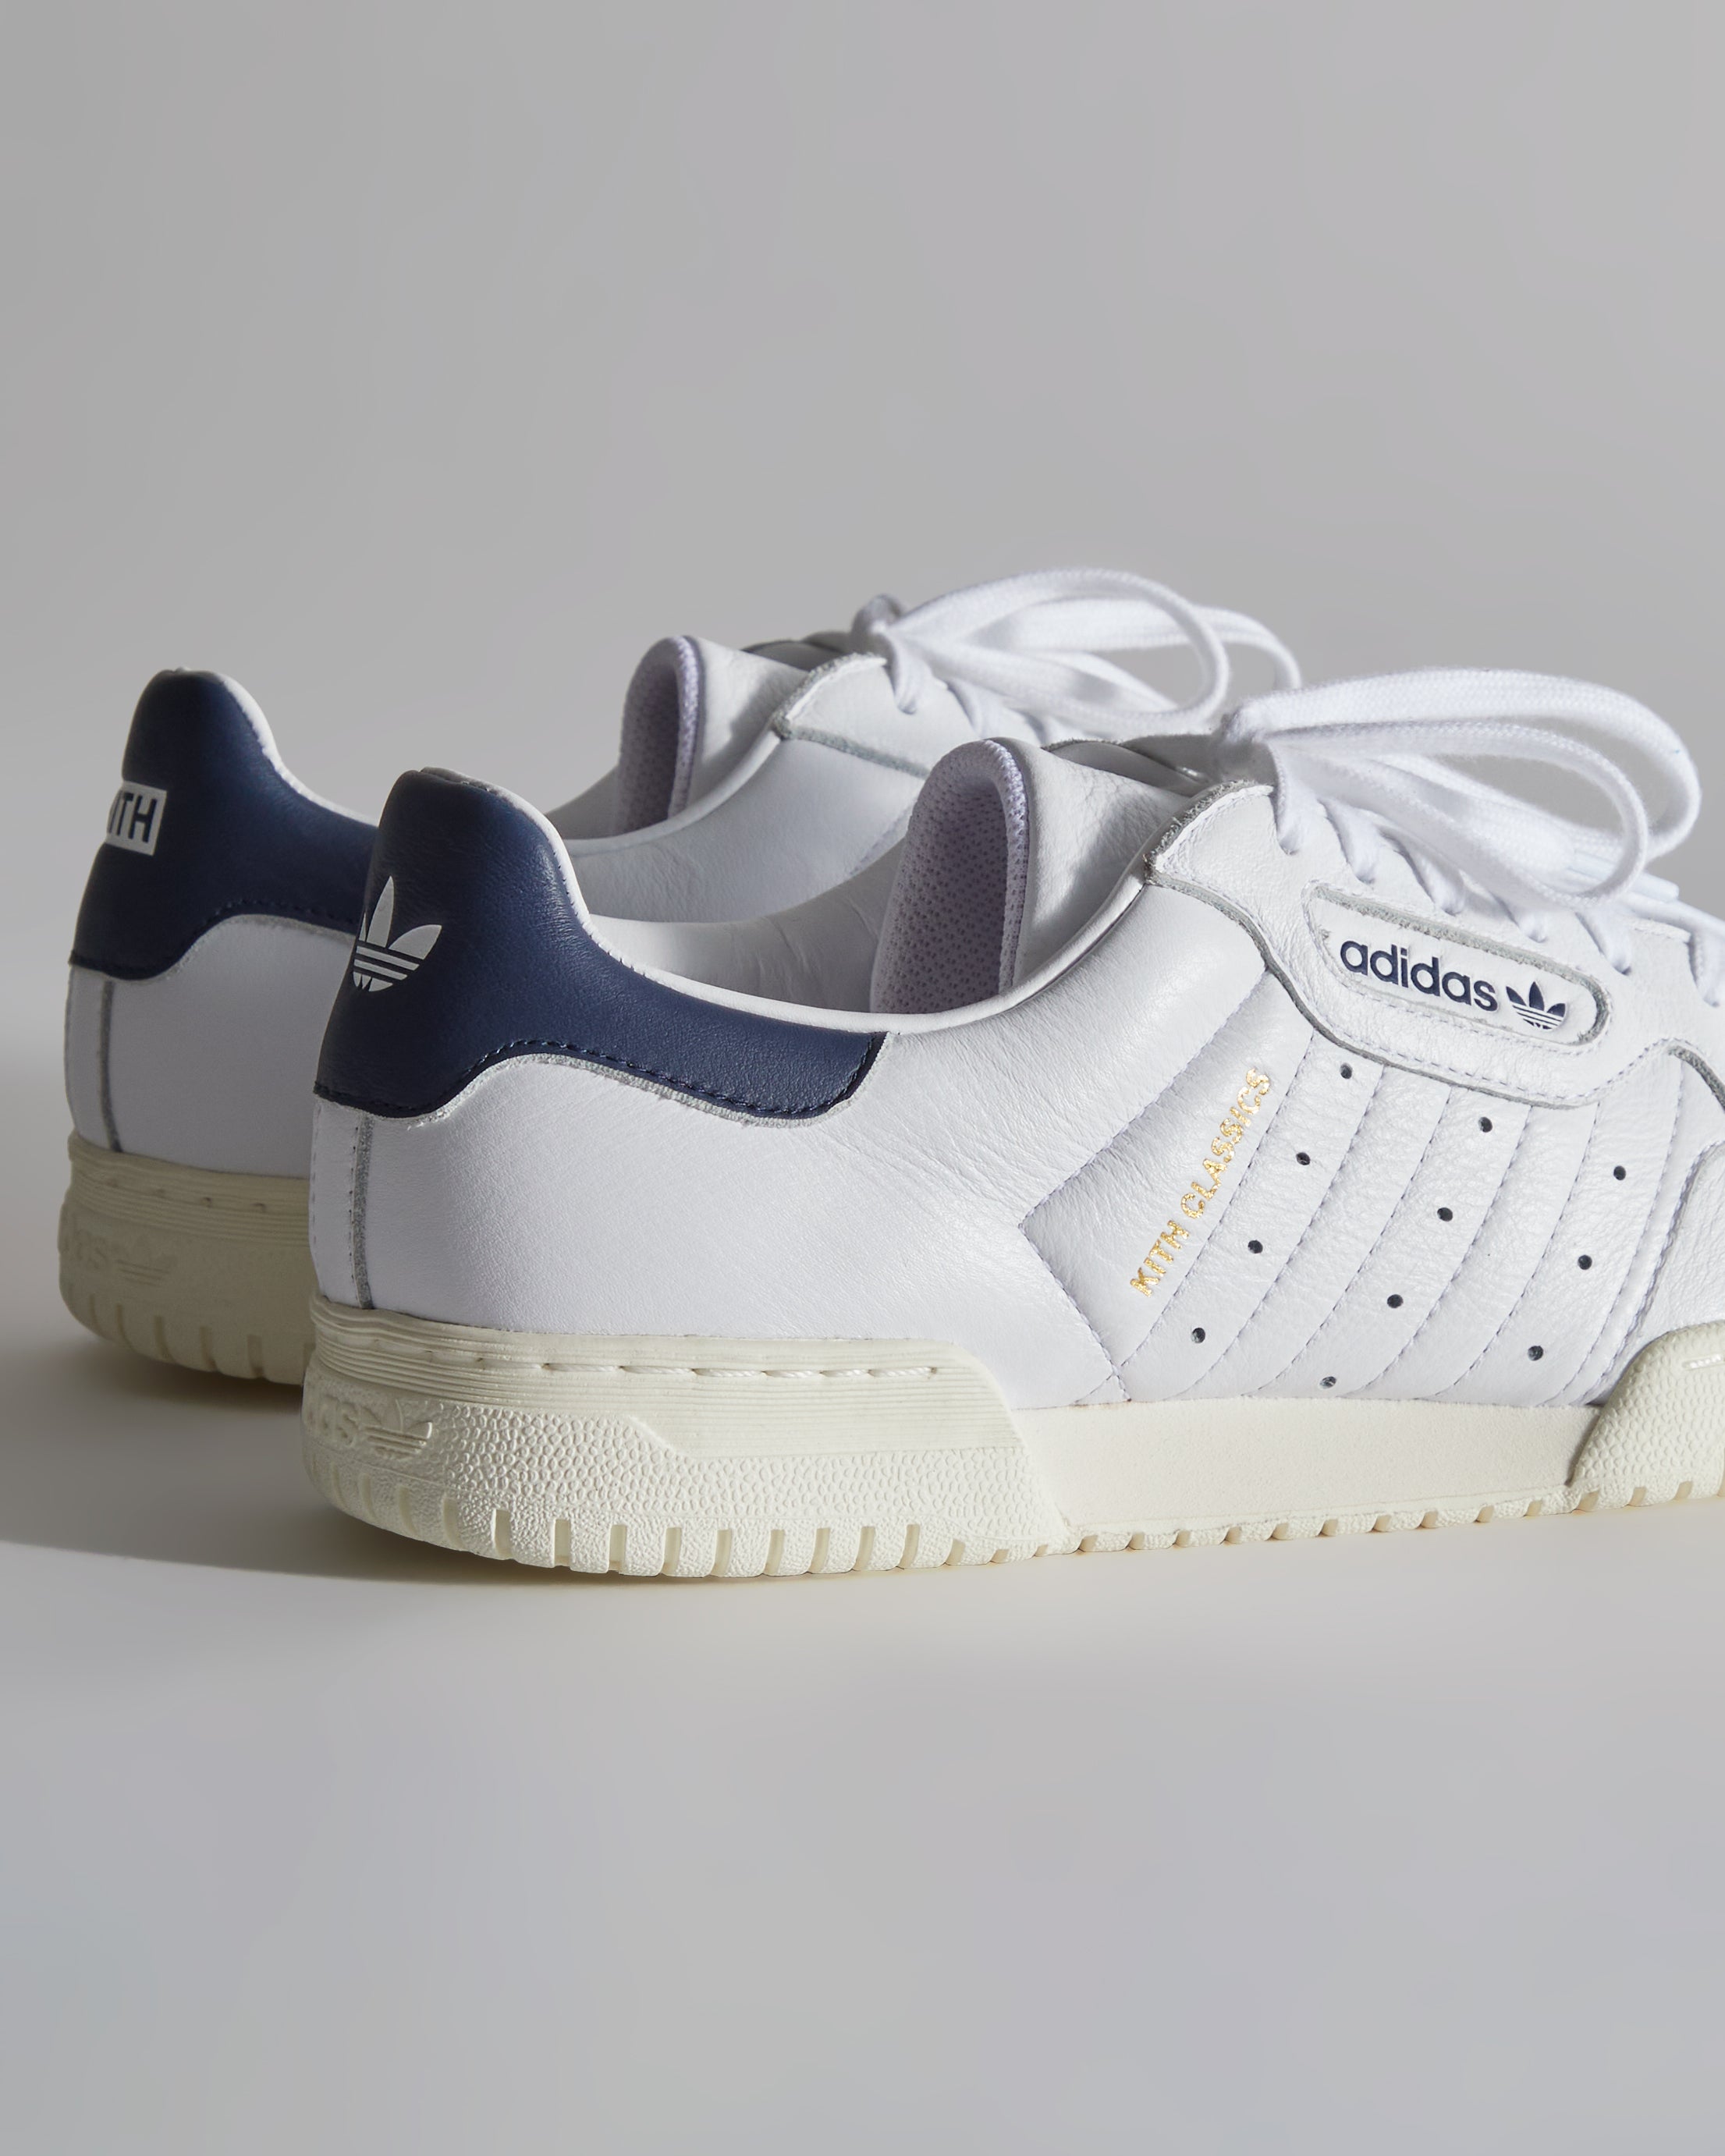 An updated take on the adidas Salvation from 1997